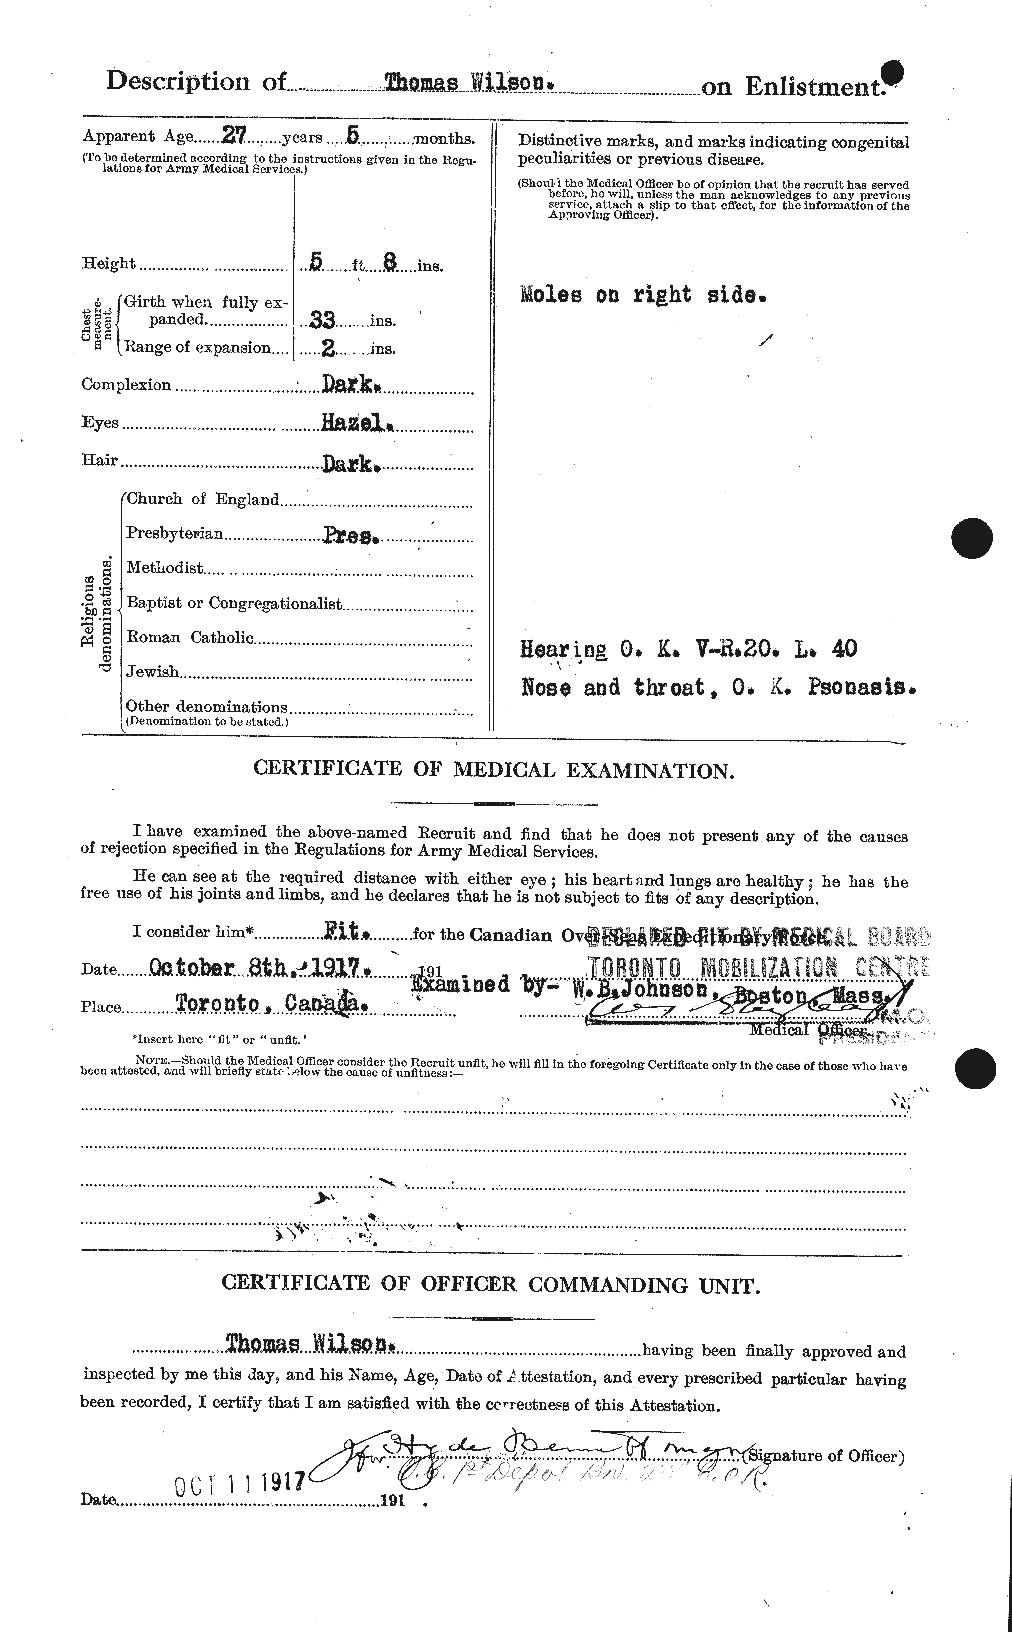 Personnel Records of the First World War - CEF 681173b